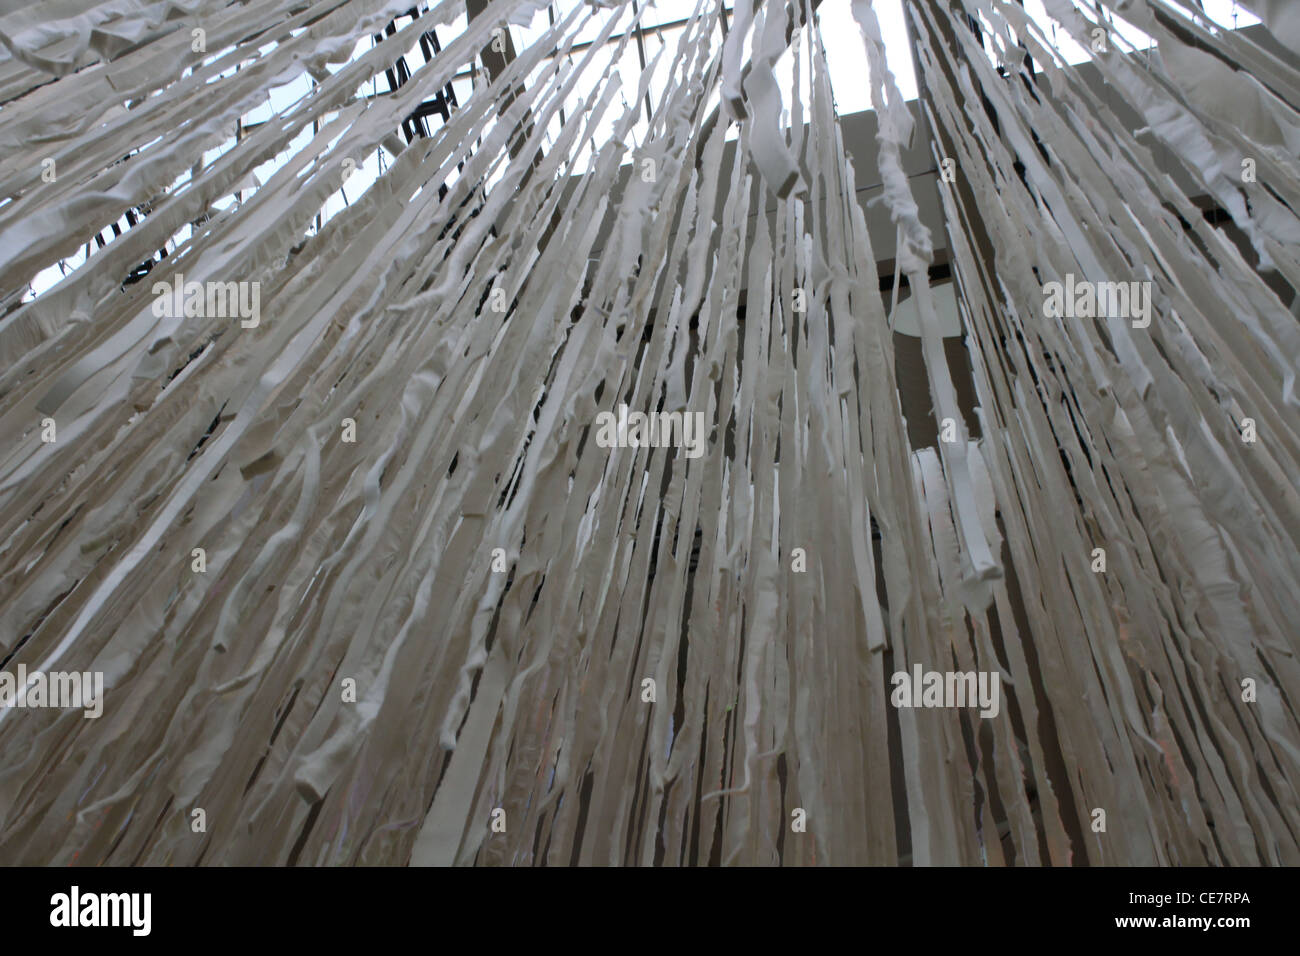 White Cloth Fabric Hanging Ceiling Stock Photo 43198242 Alamy